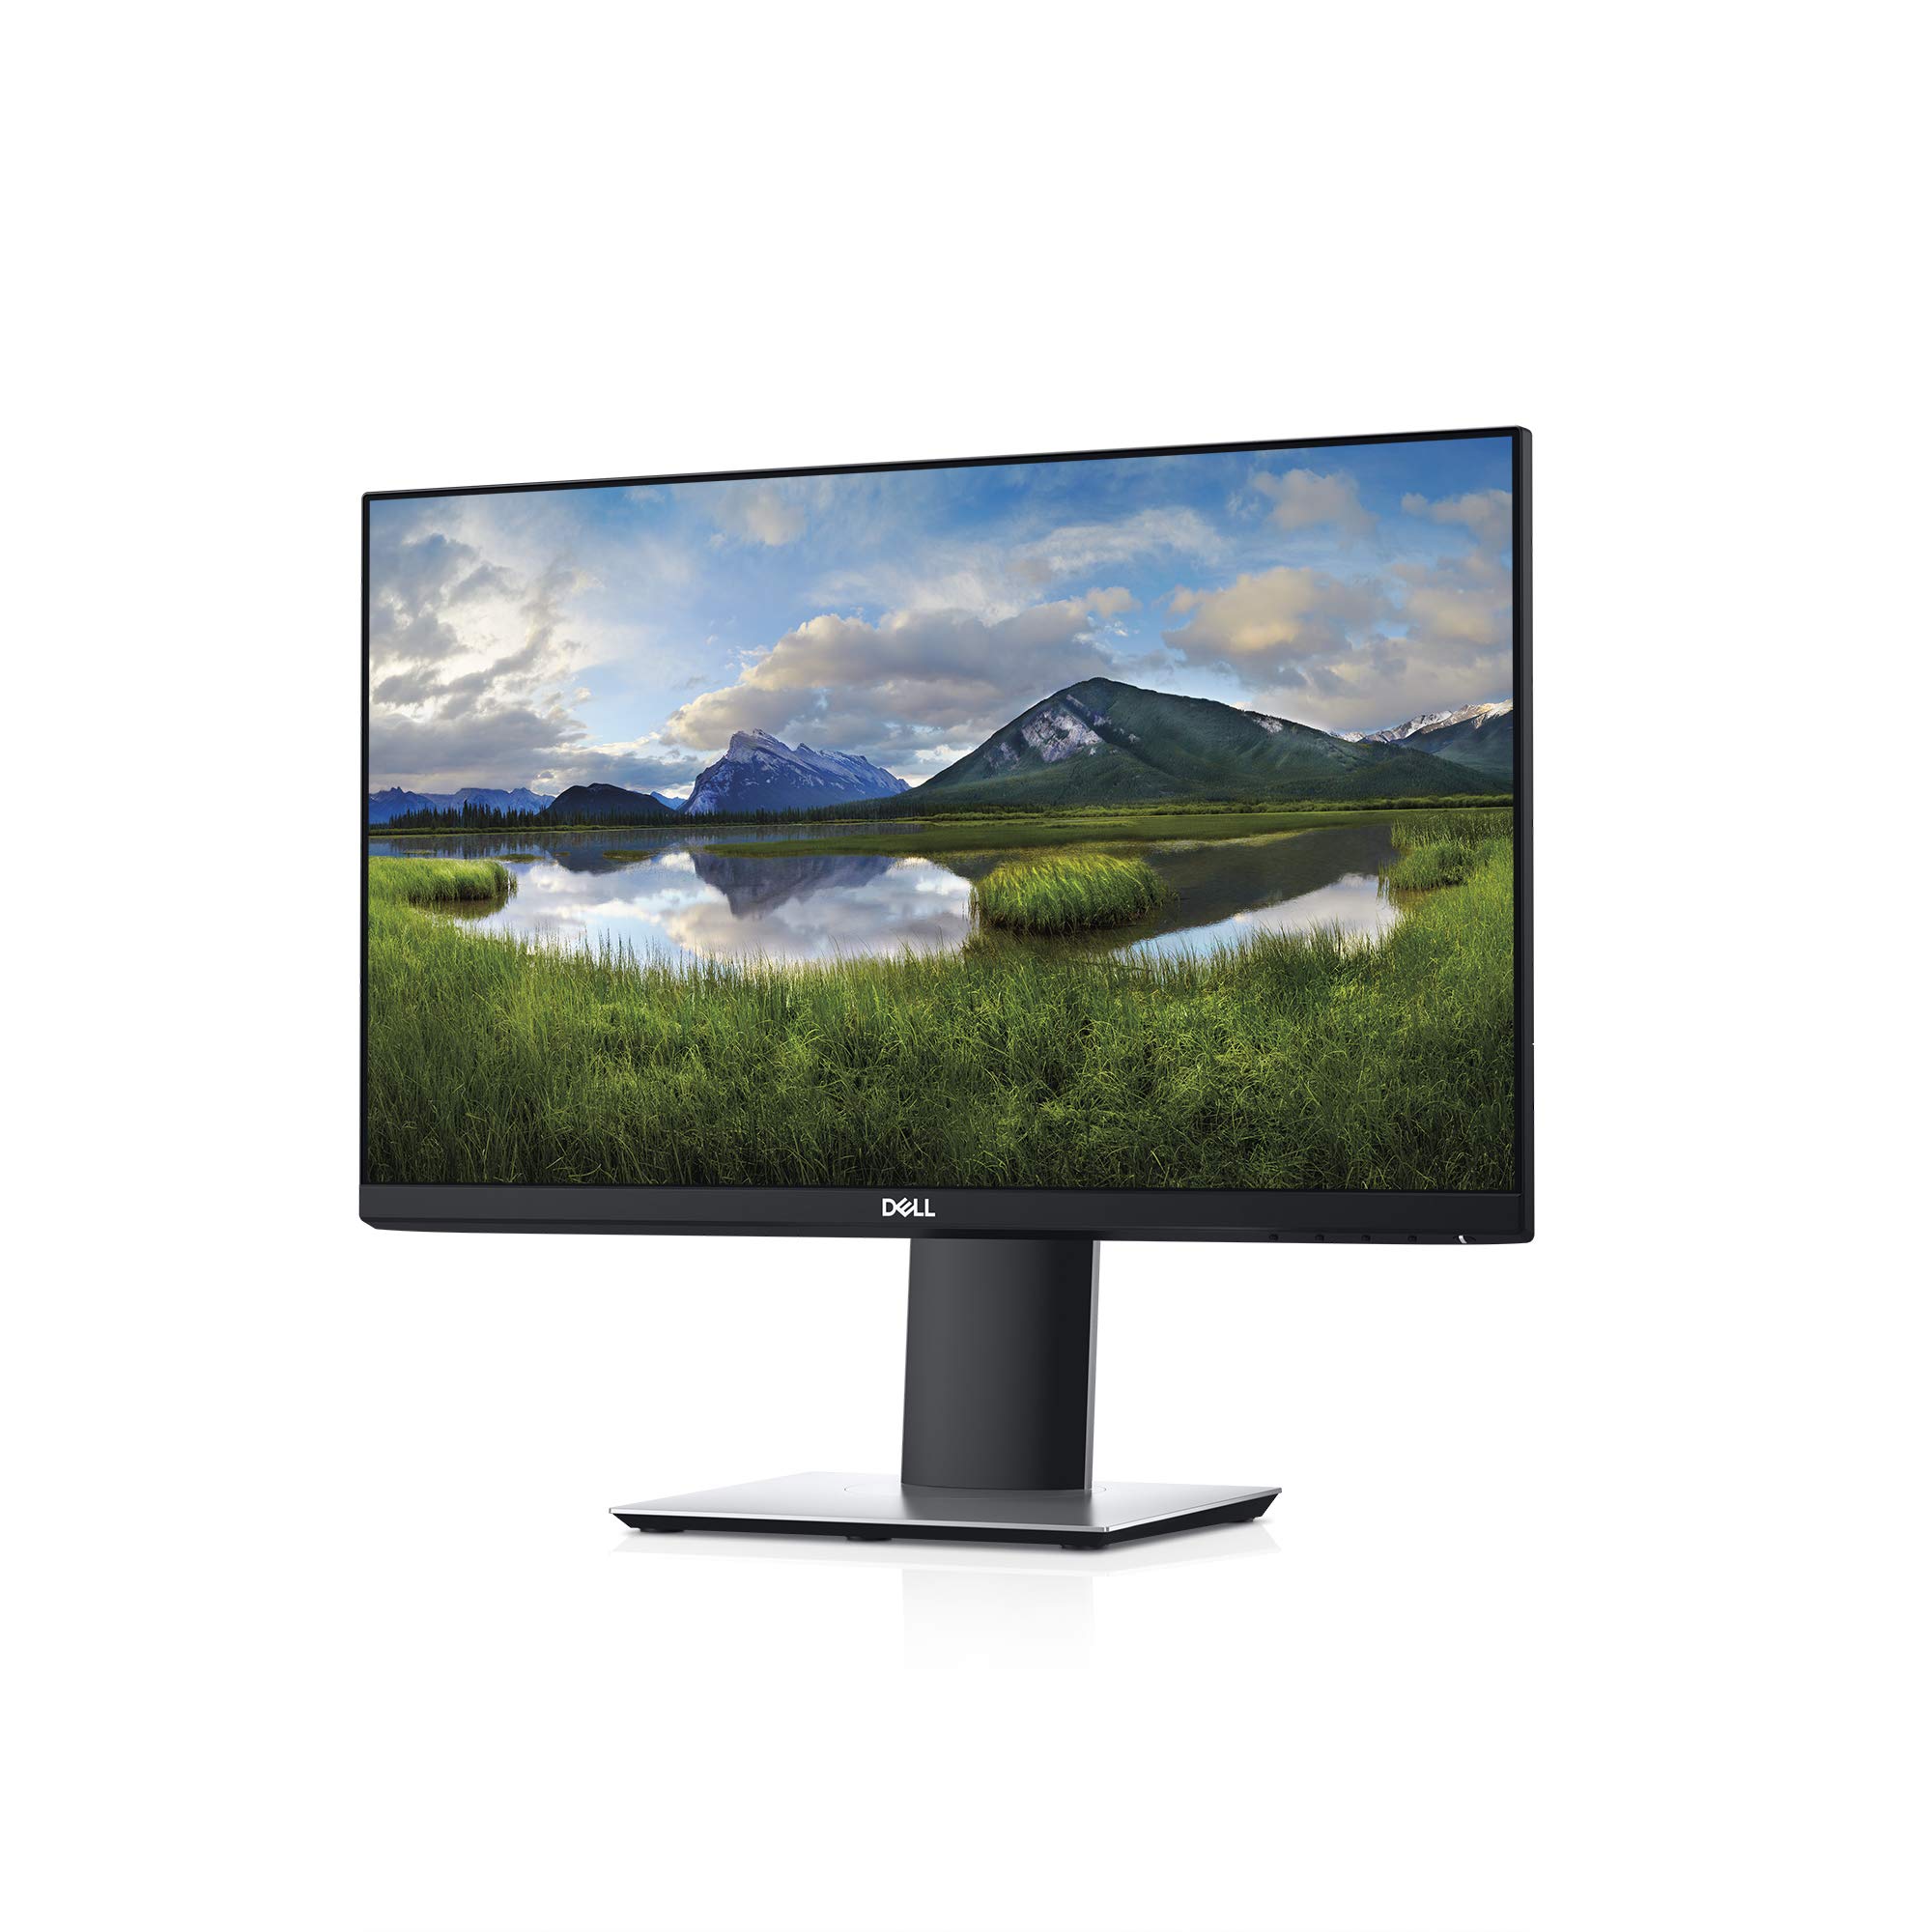 P2219H Widescreen LCD Monitor